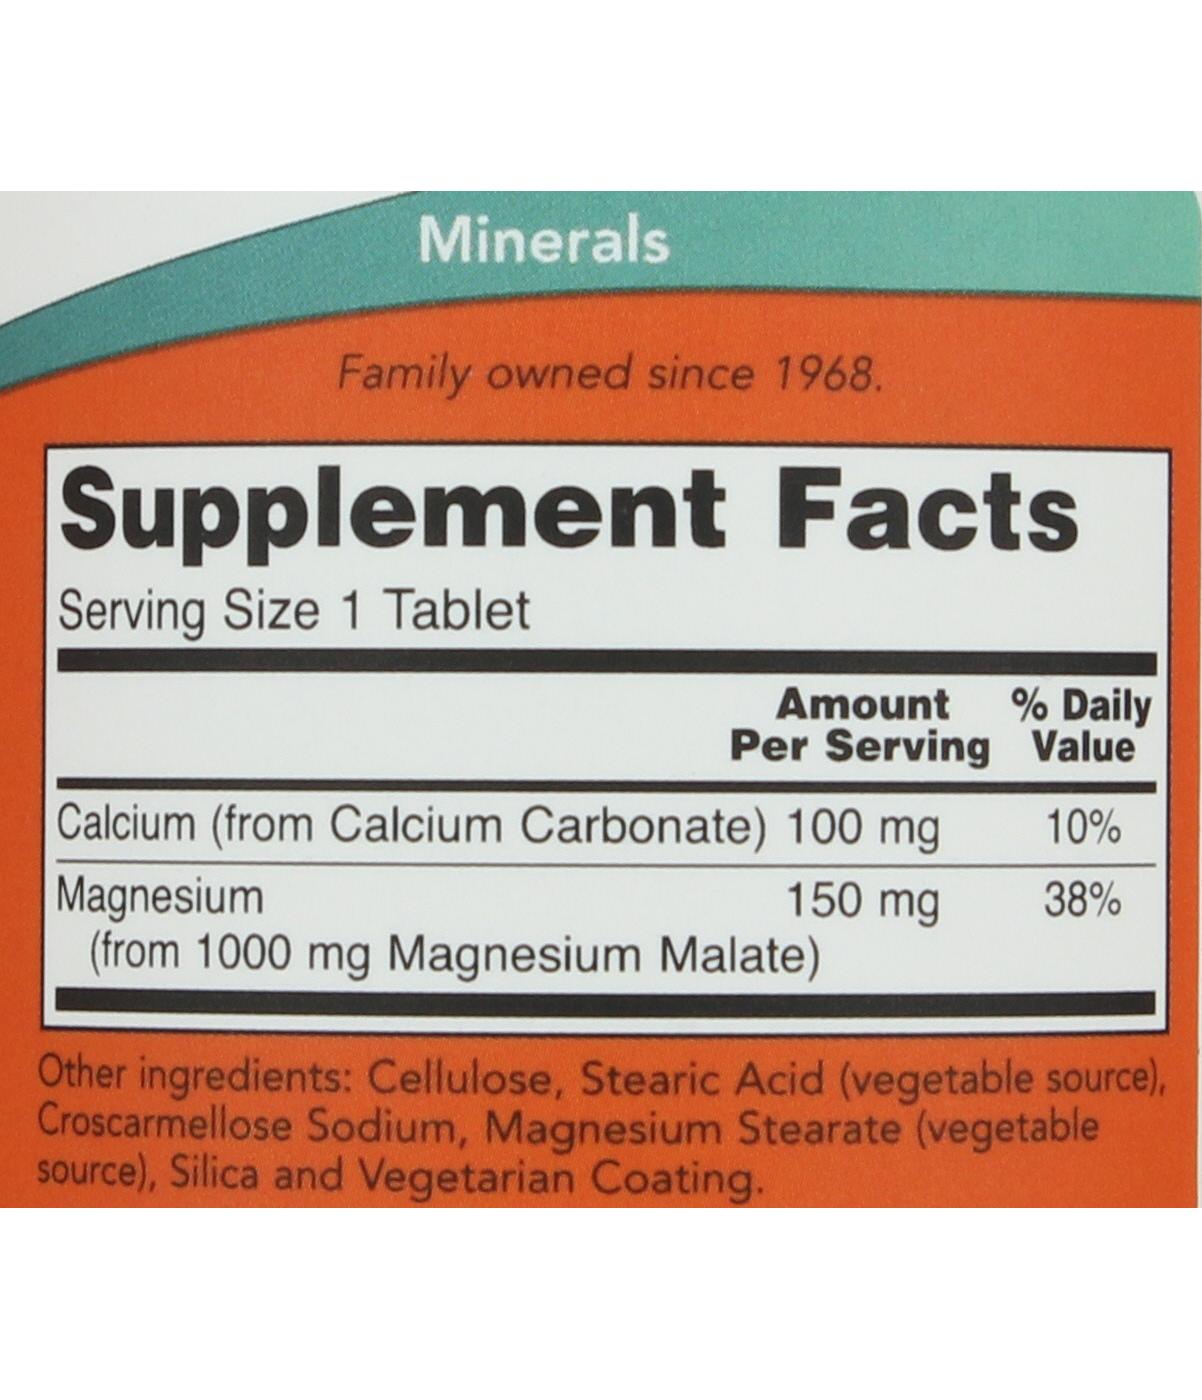 NOW Magnesium Malate 1000 mg Tablets; image 2 of 2